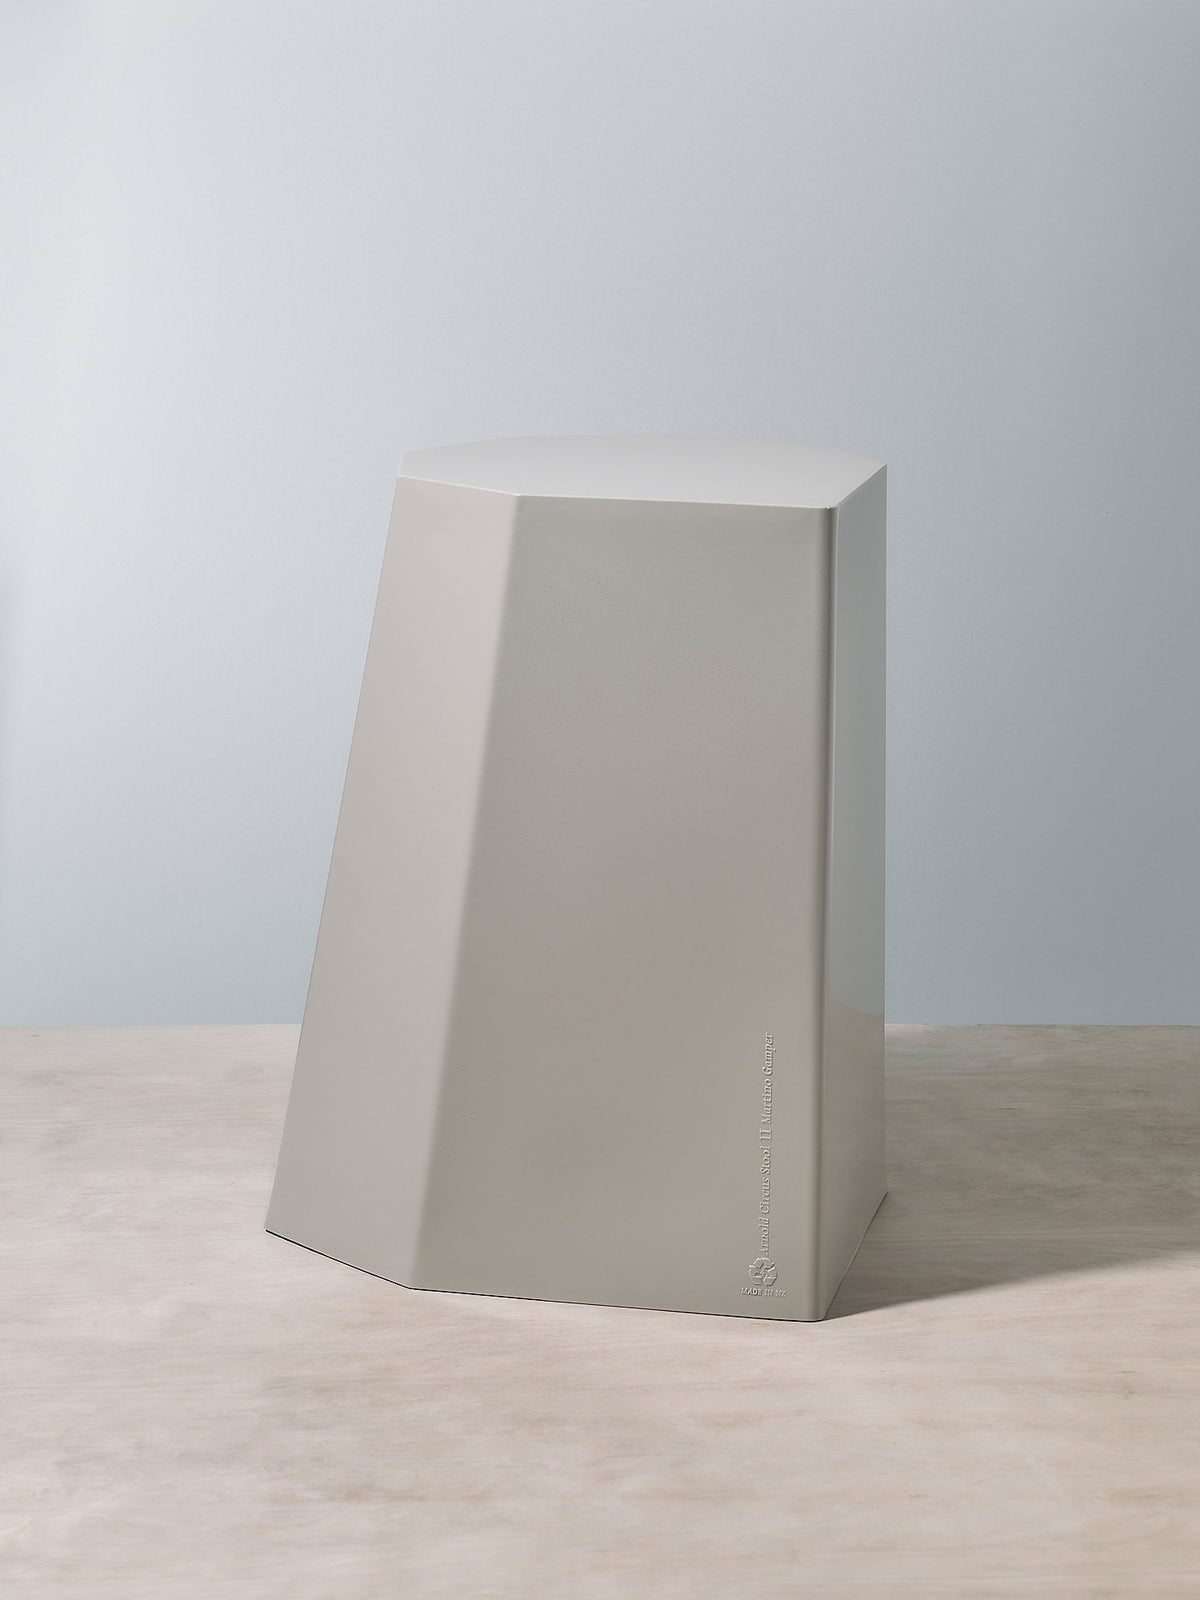 An Arnold Circus Stool – Cloud by Martino Gamper sitting on top of a table.